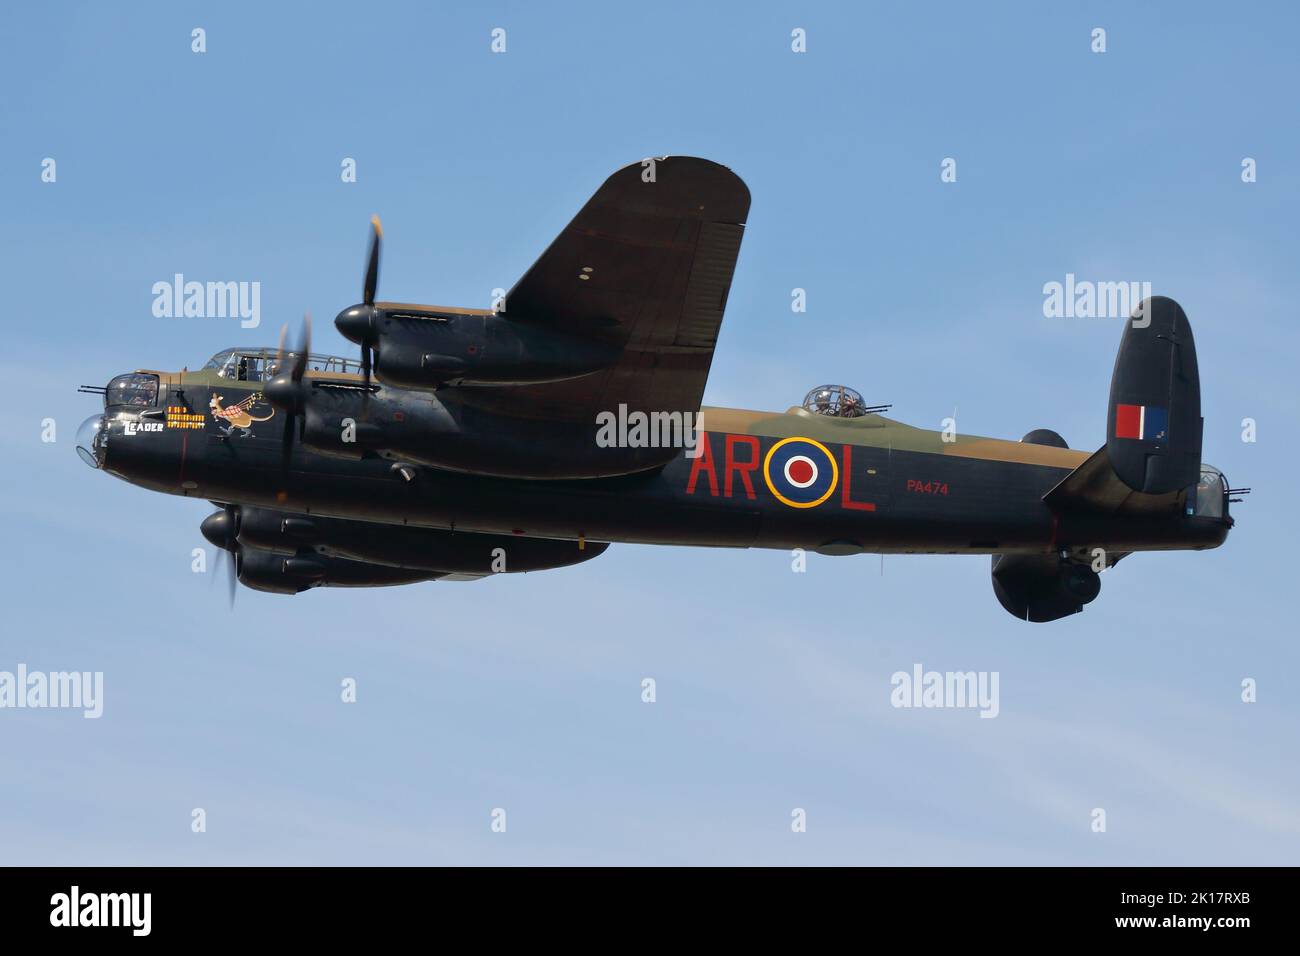 Fairford, UK. 16th July, 2022. Military aircraft from across the globe on display for the RIAT Royal International Air Tattoo. The BBMF Avro Lancaster bomber arriving at RIAT, Fairford, UK Stock Photo